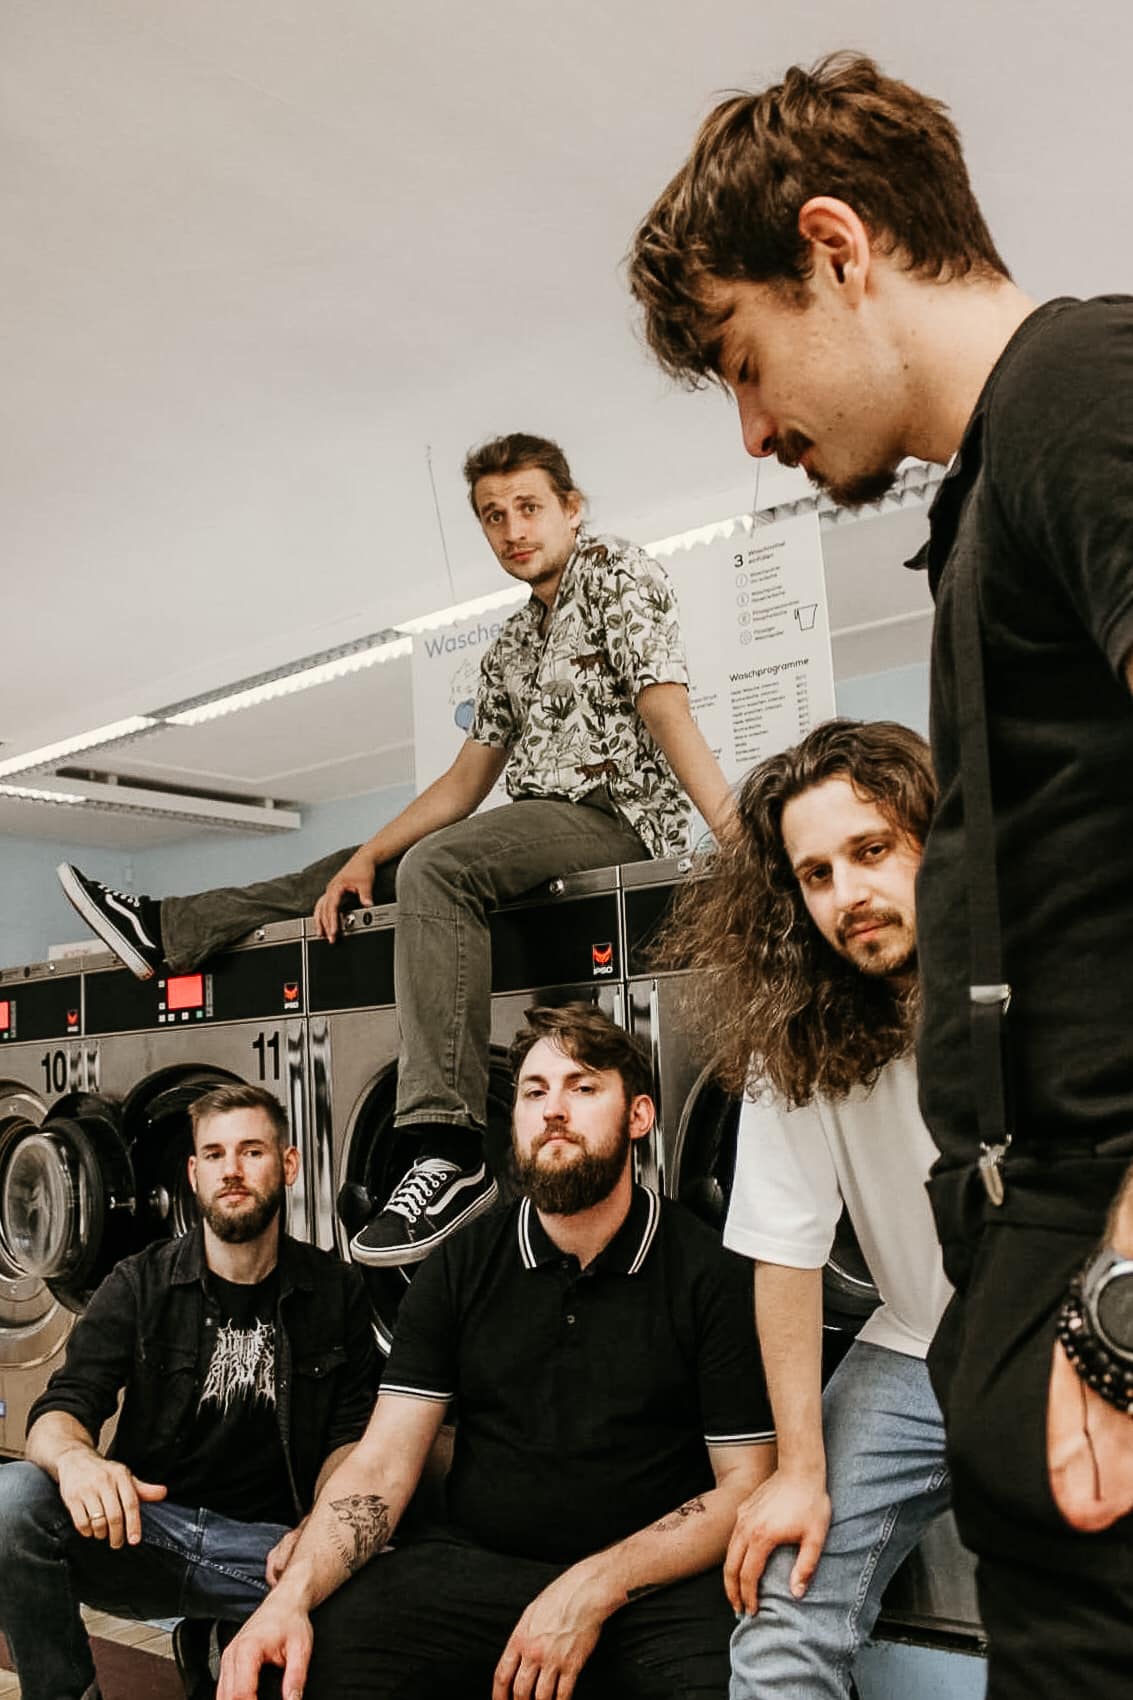 Mass Rift band photo.
Five men in a laundromat.
Two are squatting in front of the large washing machines, one is leaning against them, one is standing in front of them and one is sitting on one of the machines.